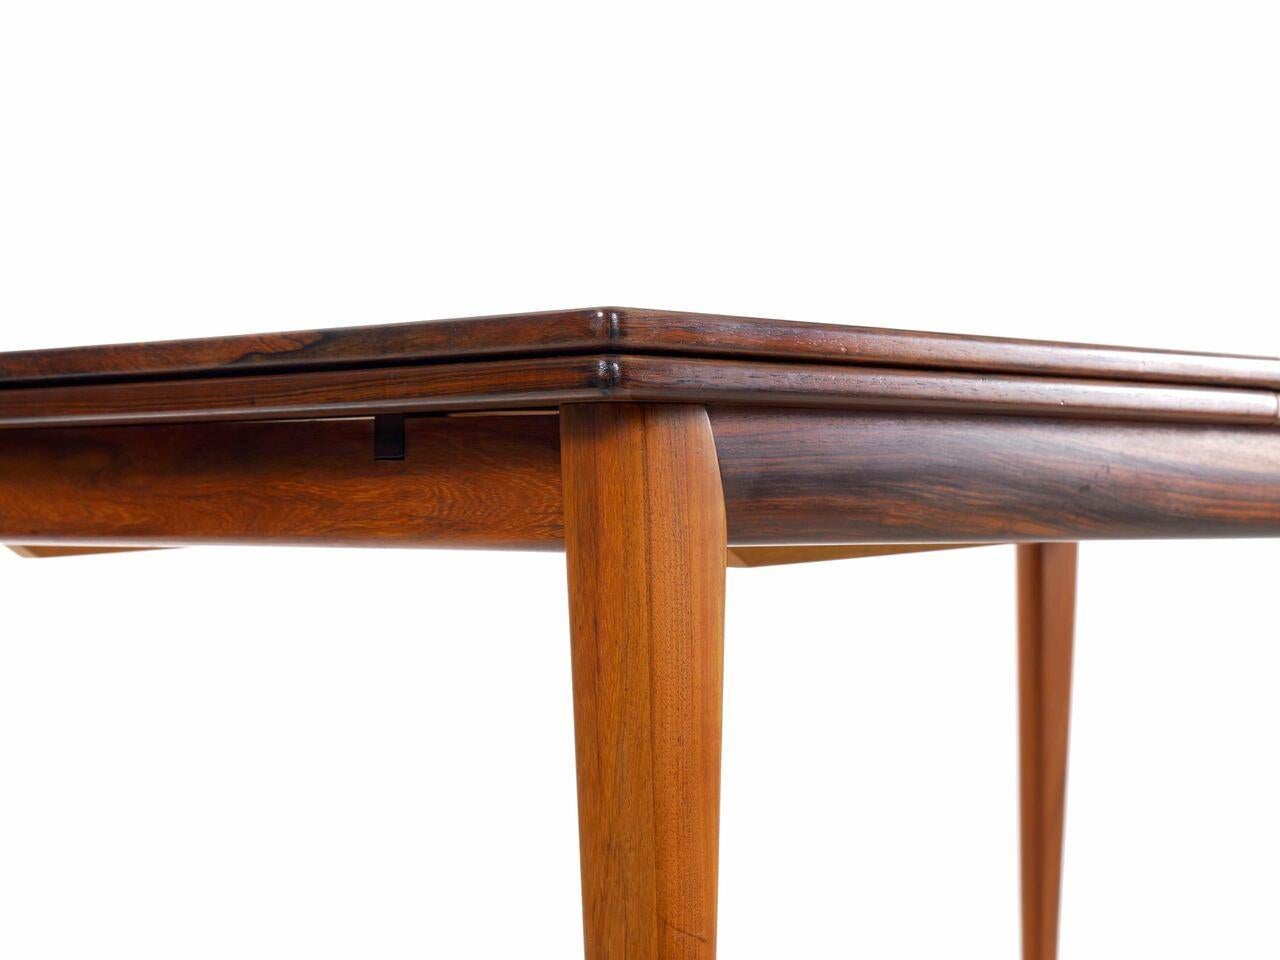 Danish Mid-Century Modern Rosewood Dining Table by Niels Møller, Model No. 254 15